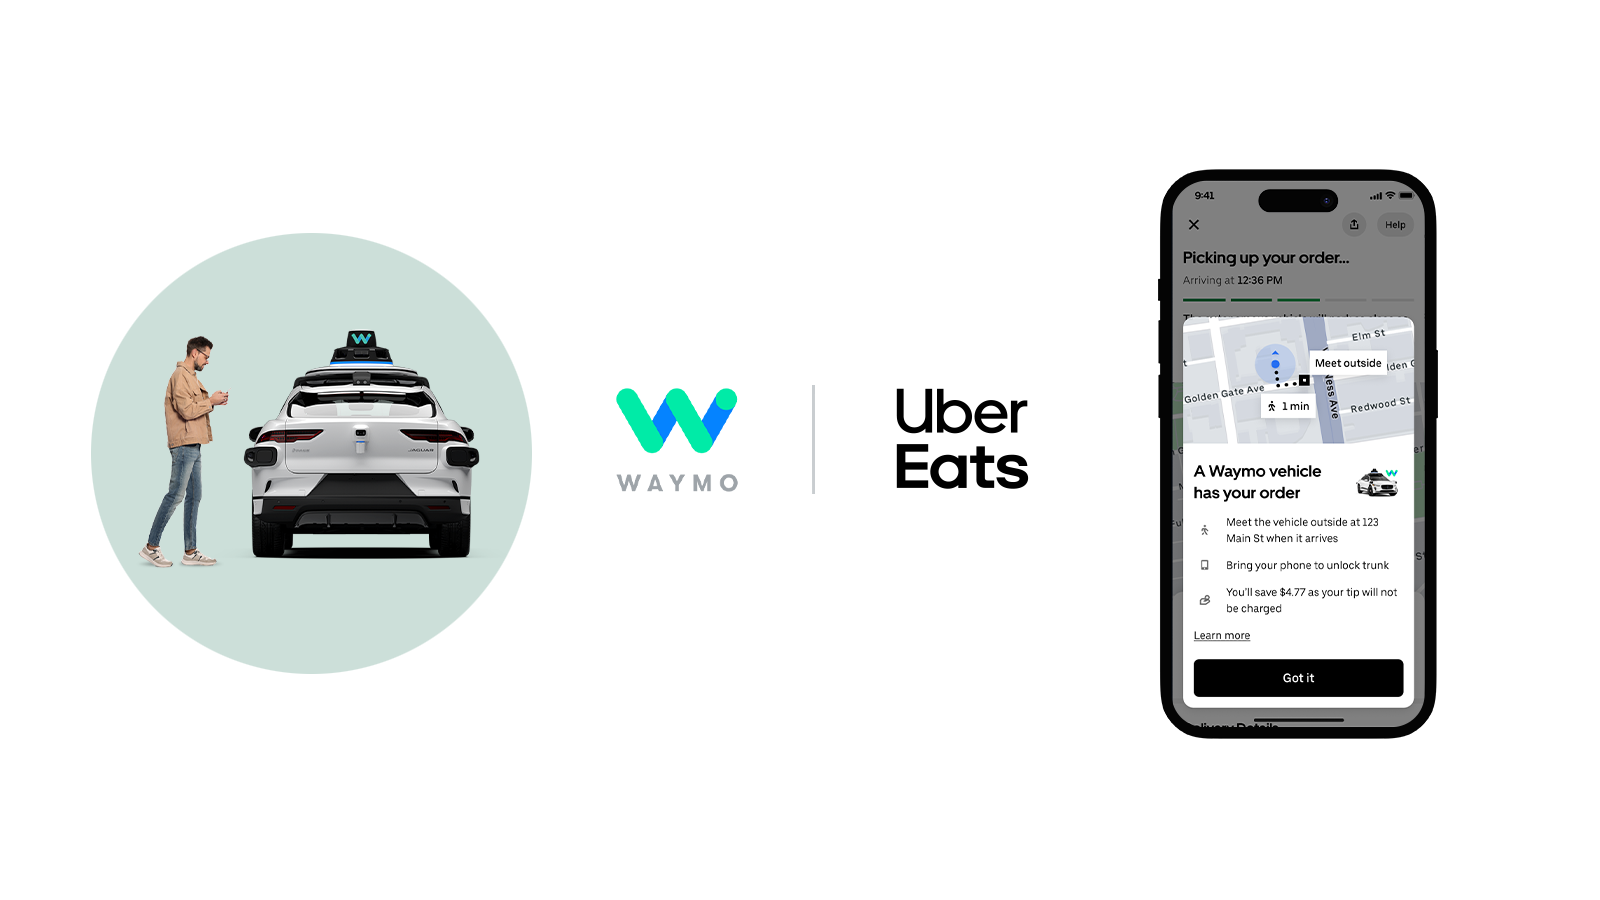 Phoenix residents can now experience Uber Eats delivery with the Waymo Driver